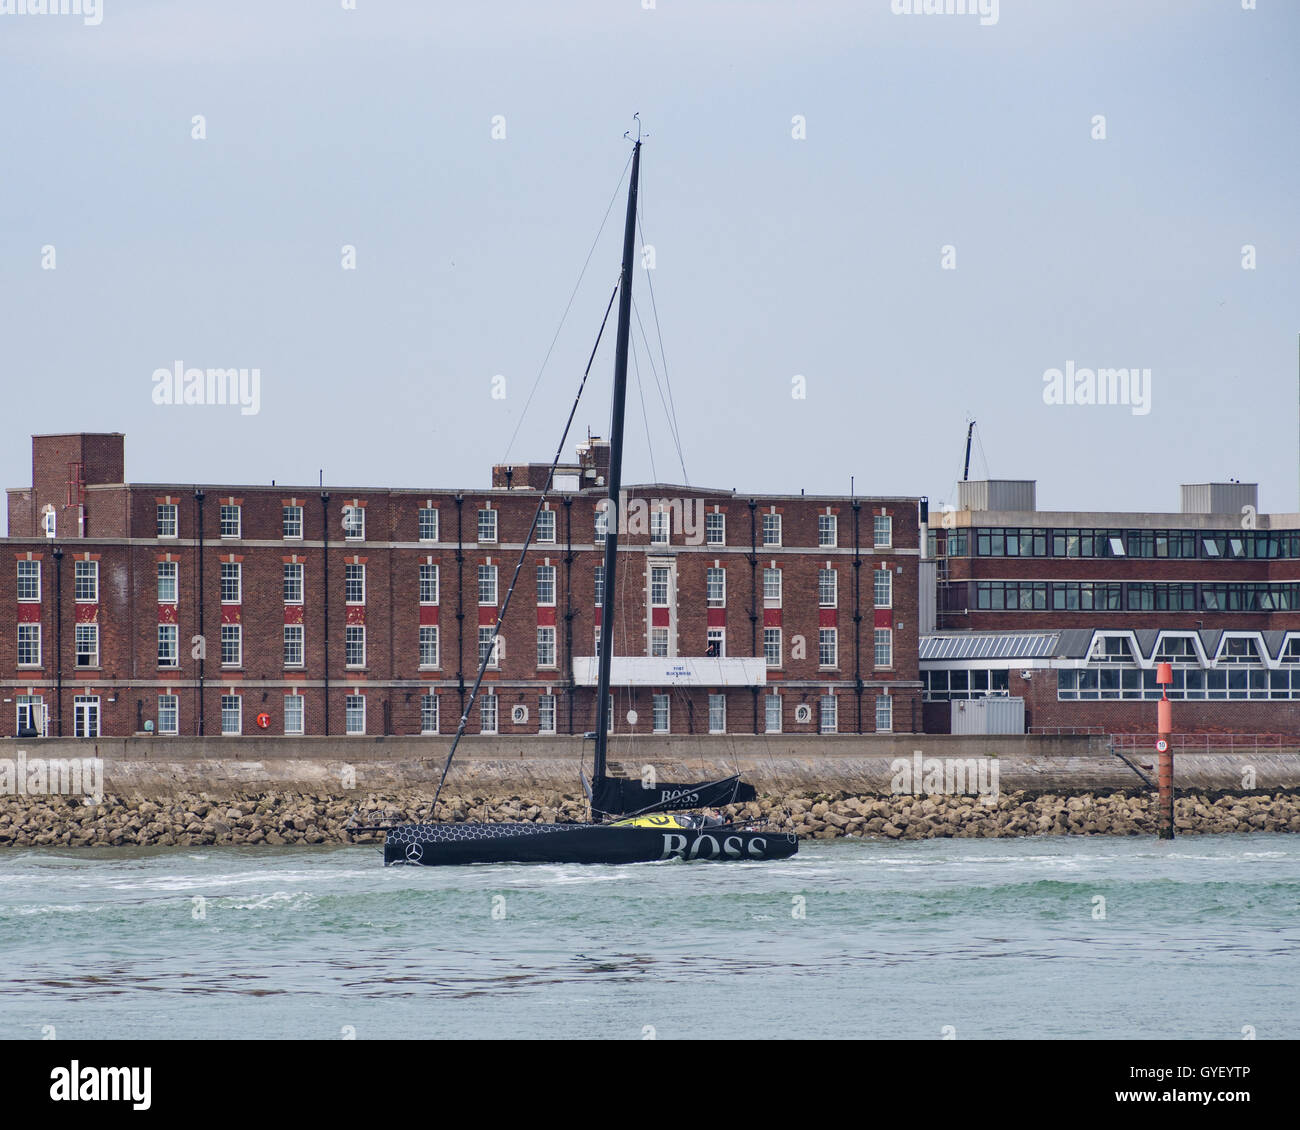 Alex Thomson racing IMOCA 60 racing yacht leaving Portsmouth Harbour, England Stock Photo